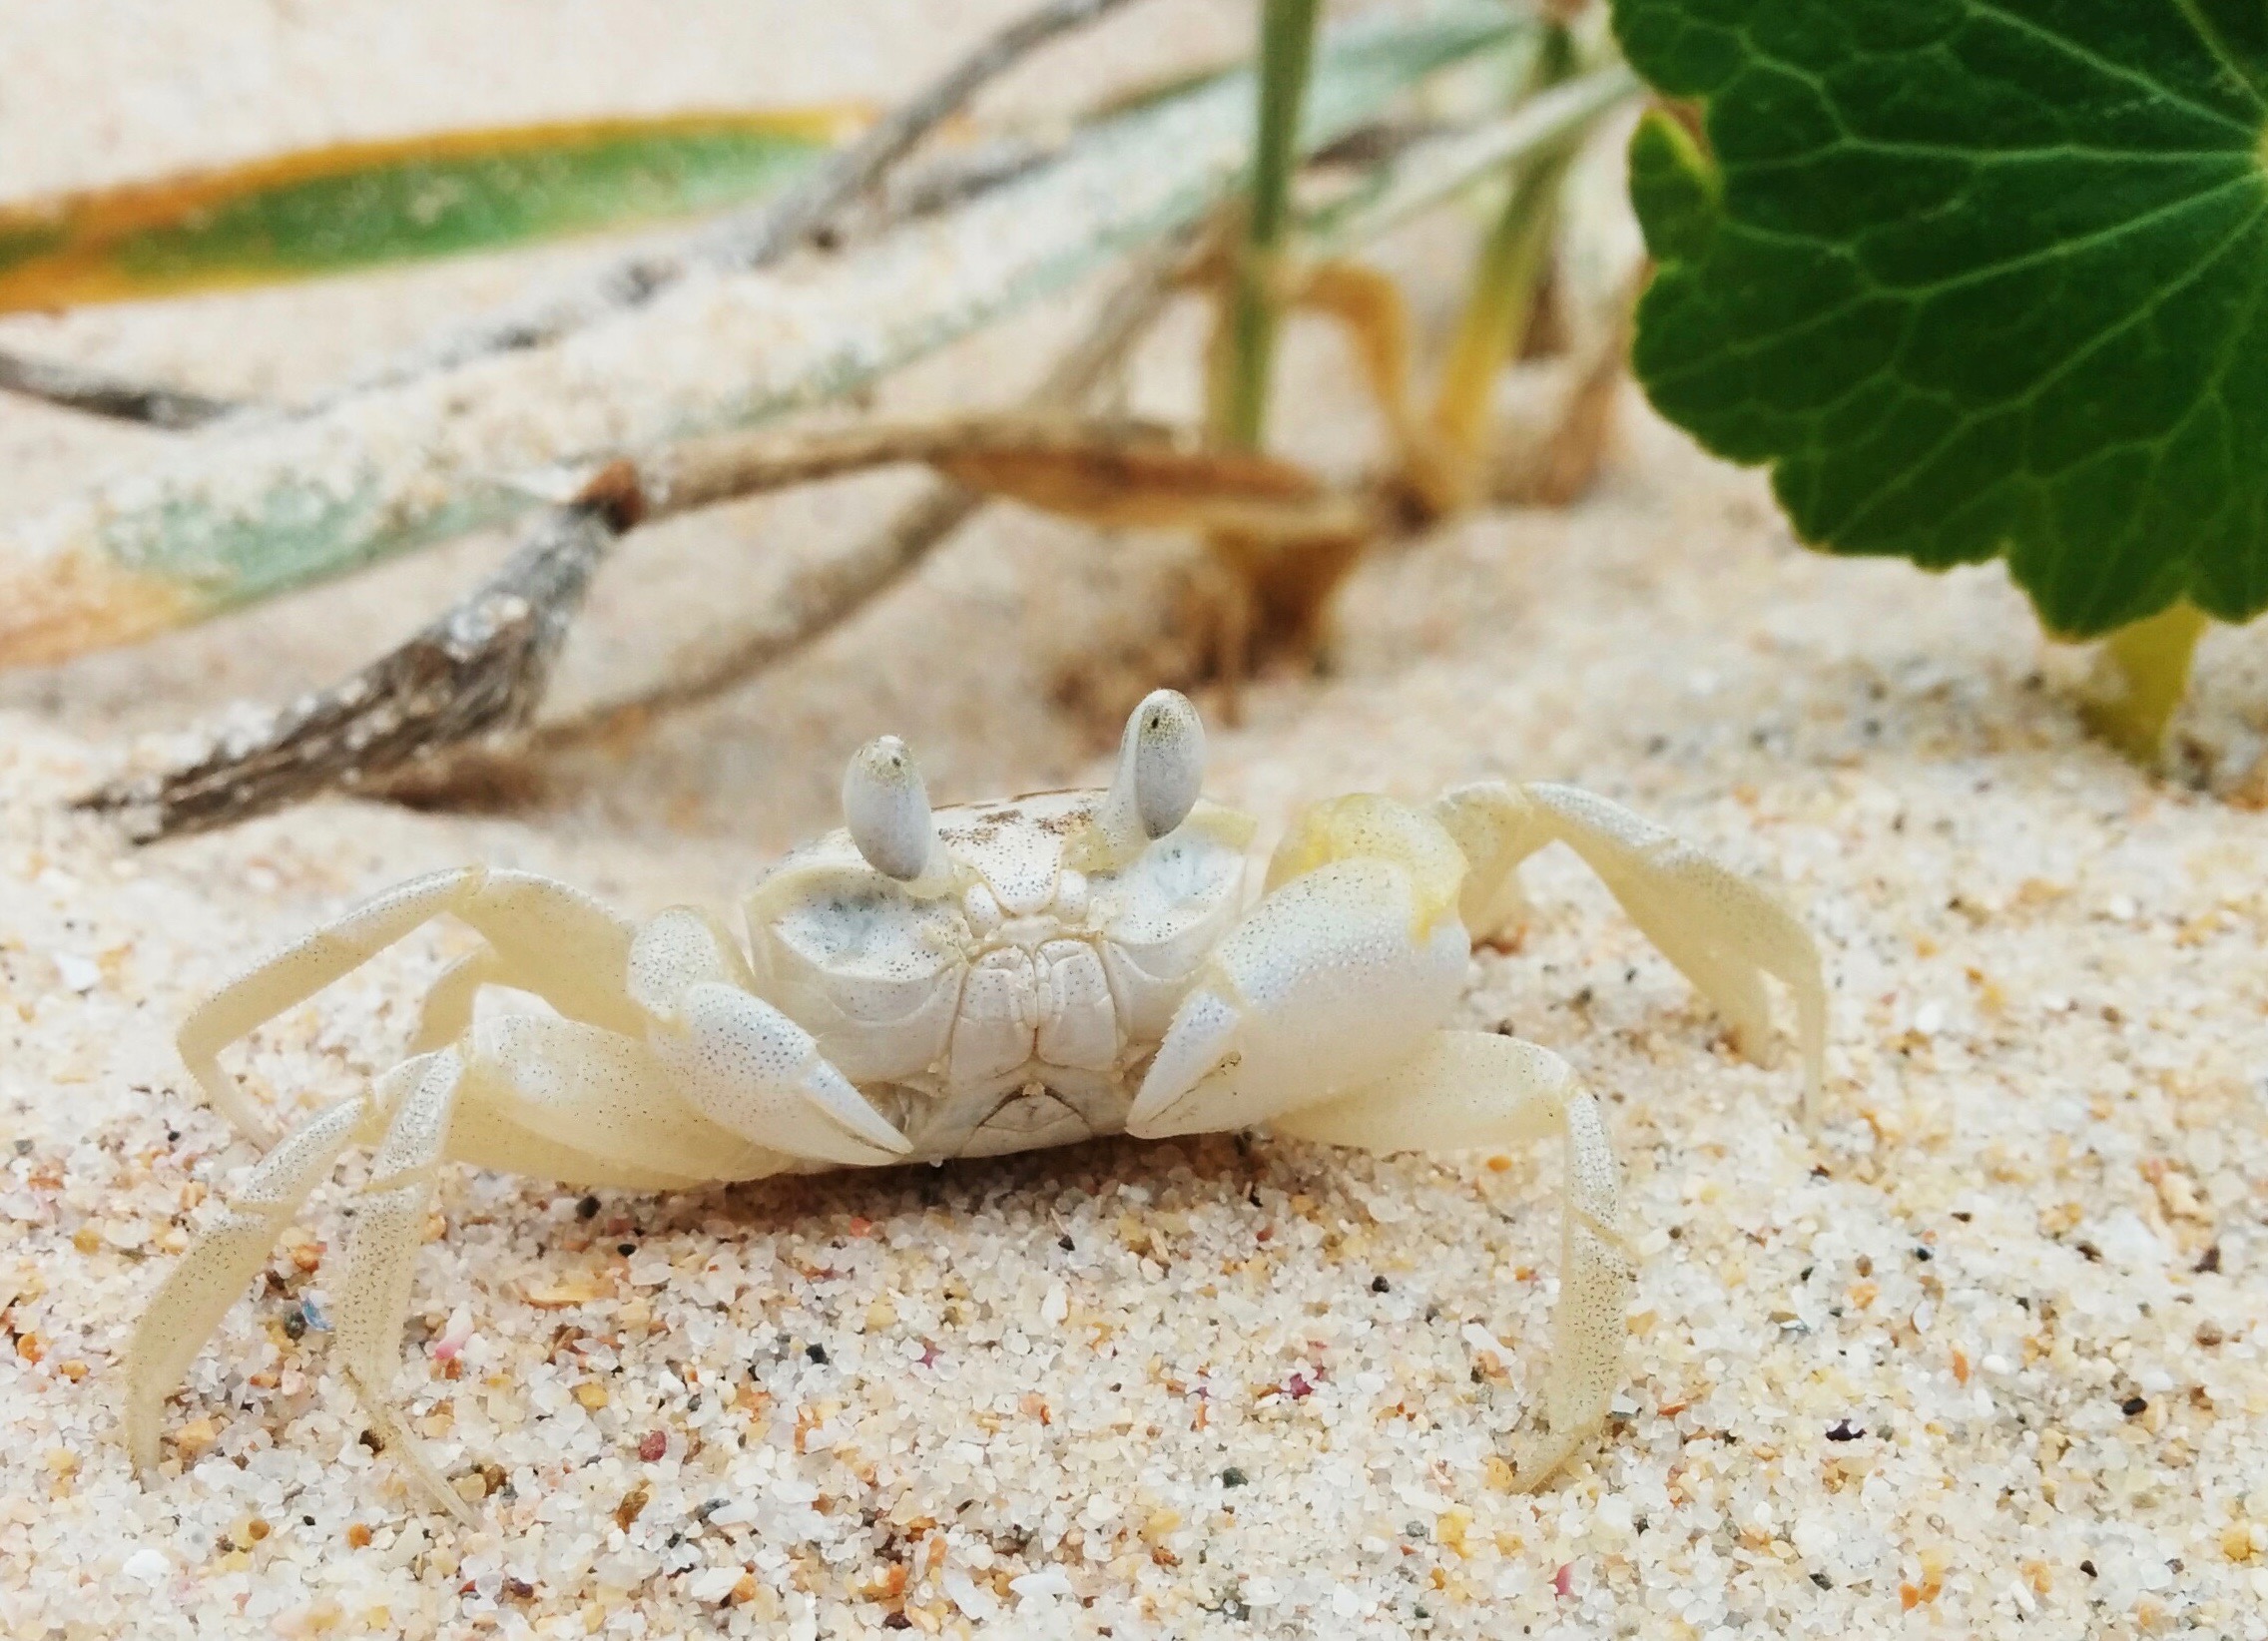 A small white crab that blends into the sand.